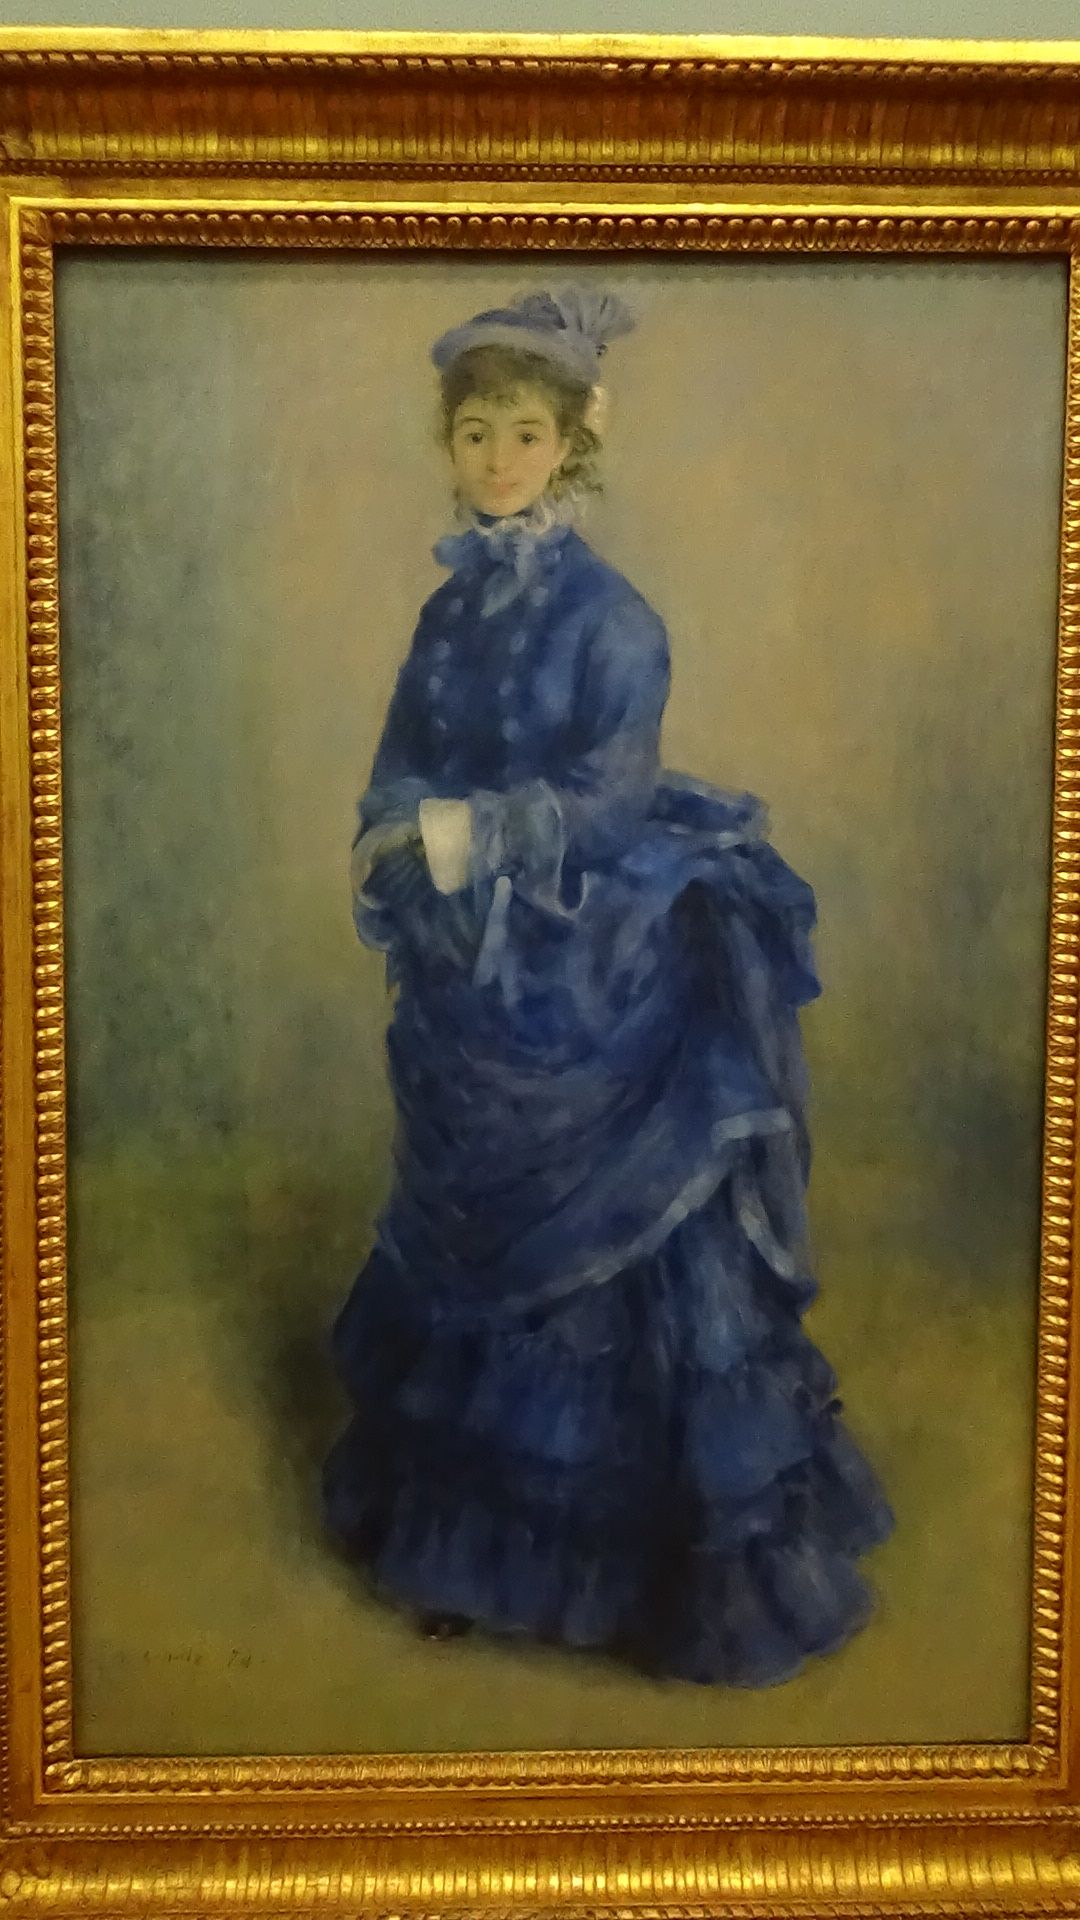 Photograph of the renoir painting La Parisienne as it appears in the gallery in National Museum Cardiff.